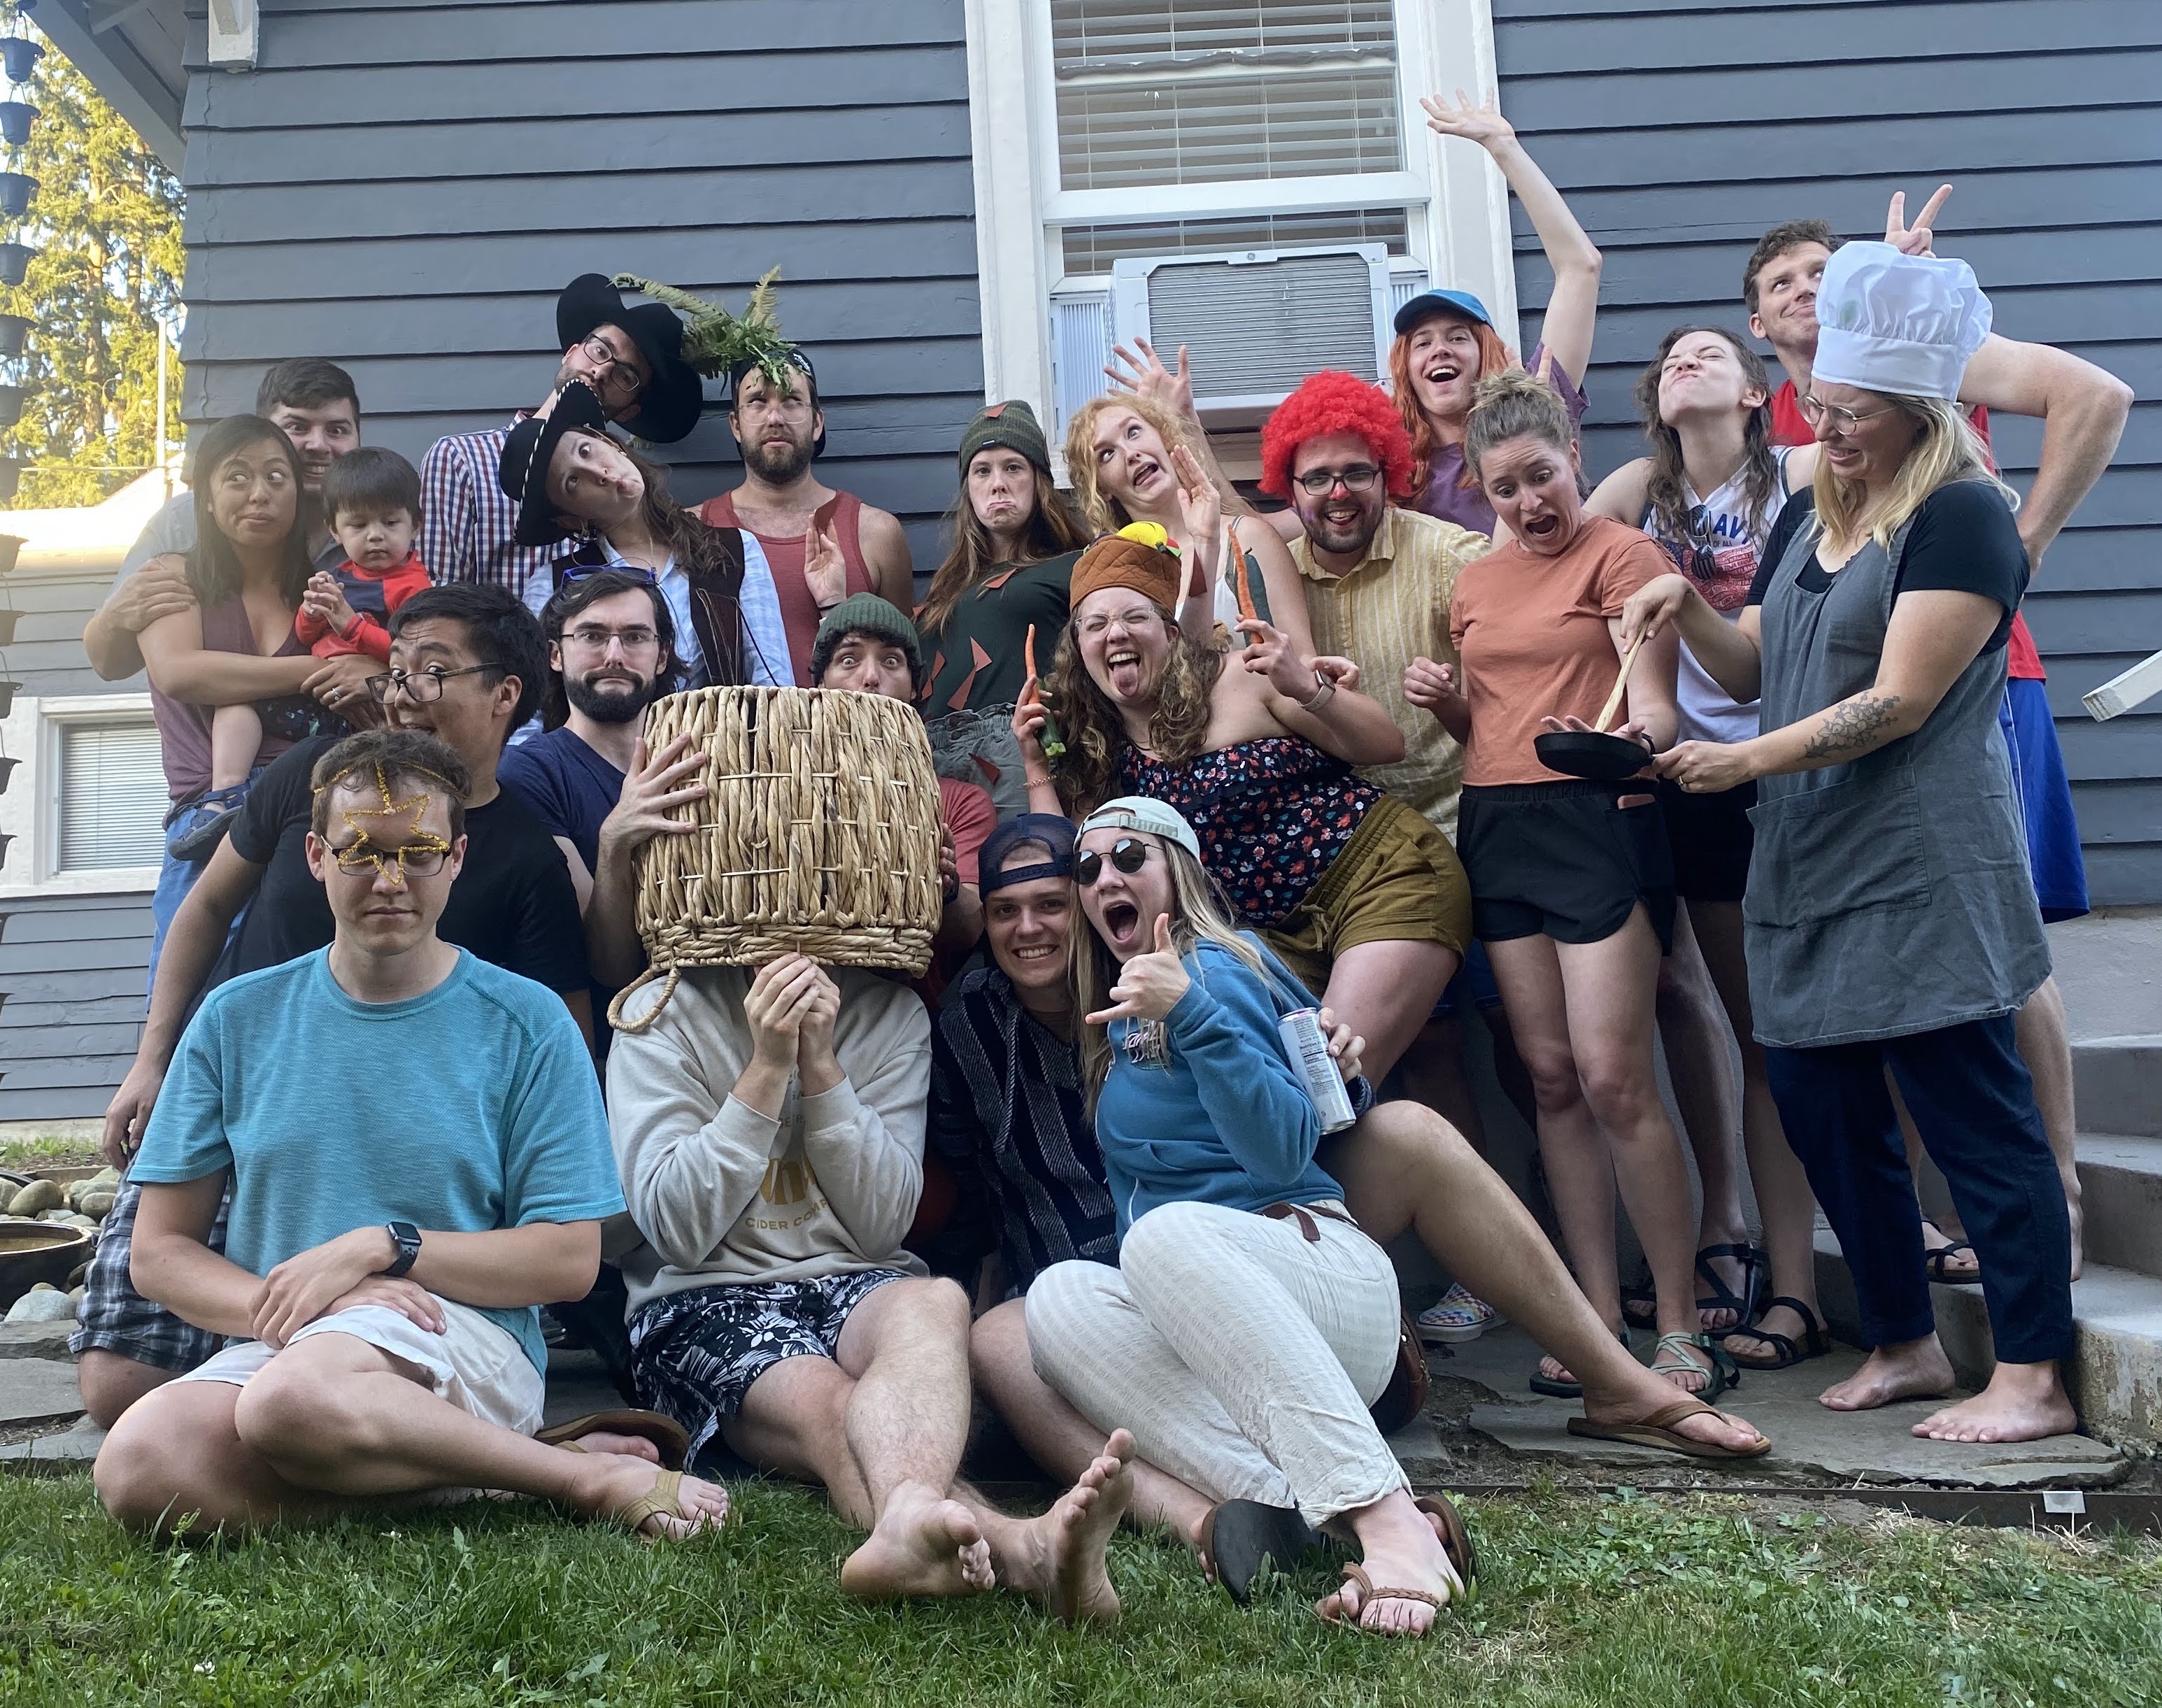 Silly group photo of lots of friends